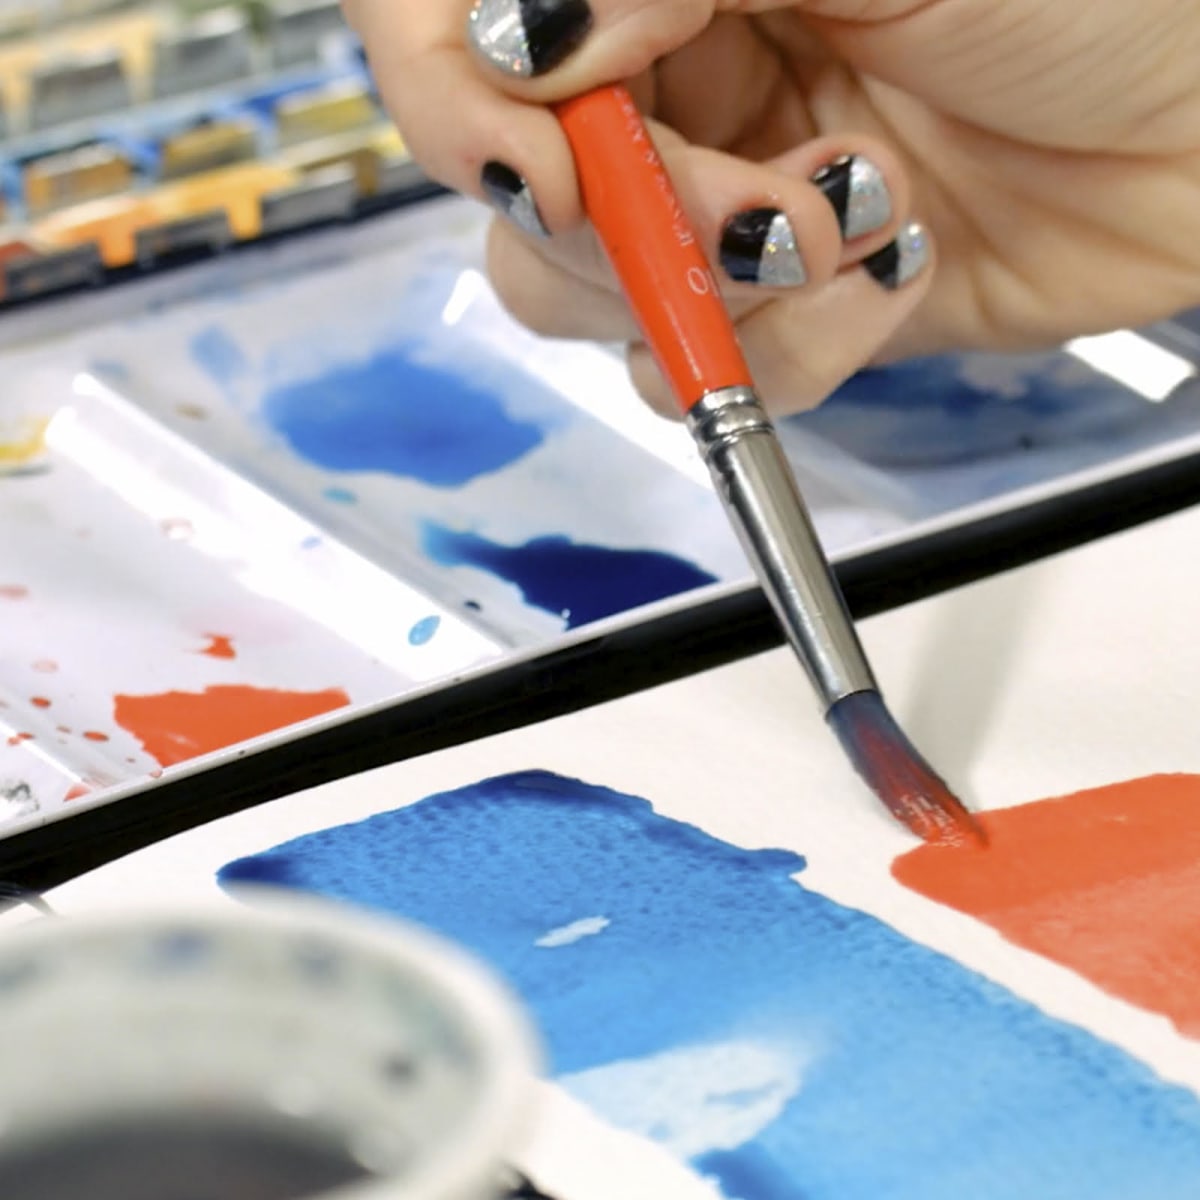 Watercolor Painting Supplies: Everything You Need to Paint with